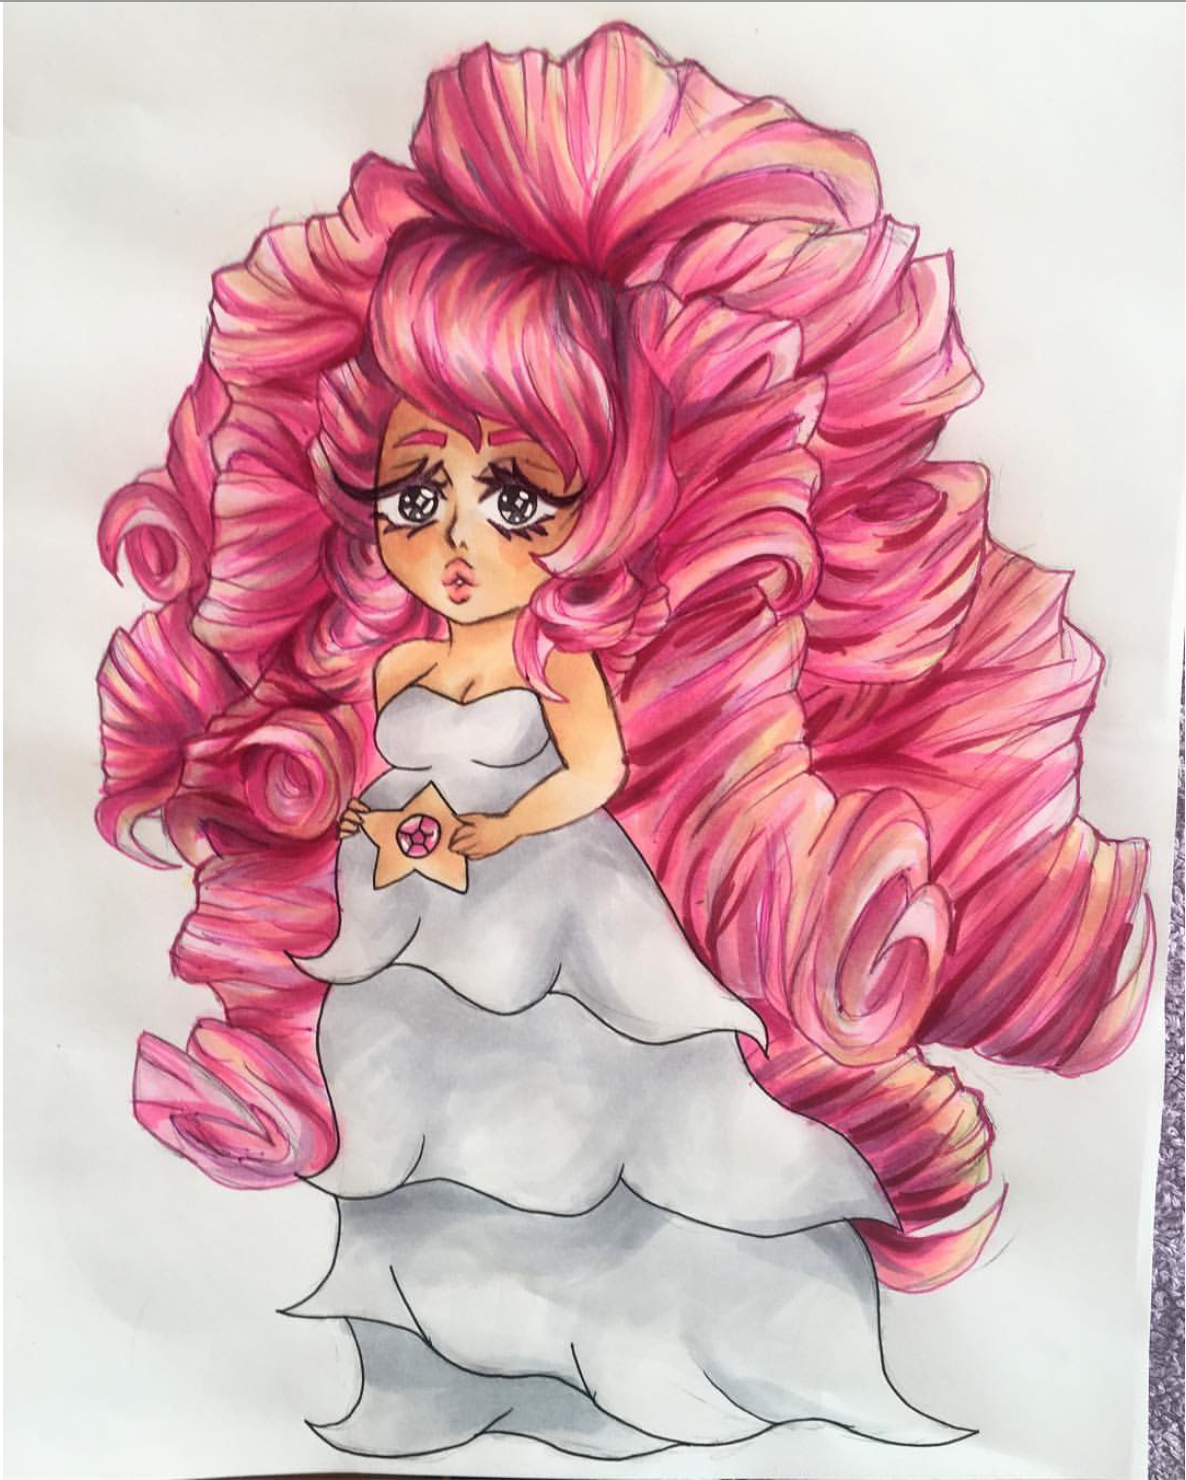 Rose Quartz Done with copic markers, sorry for my inactivity. I’ll try and be more active